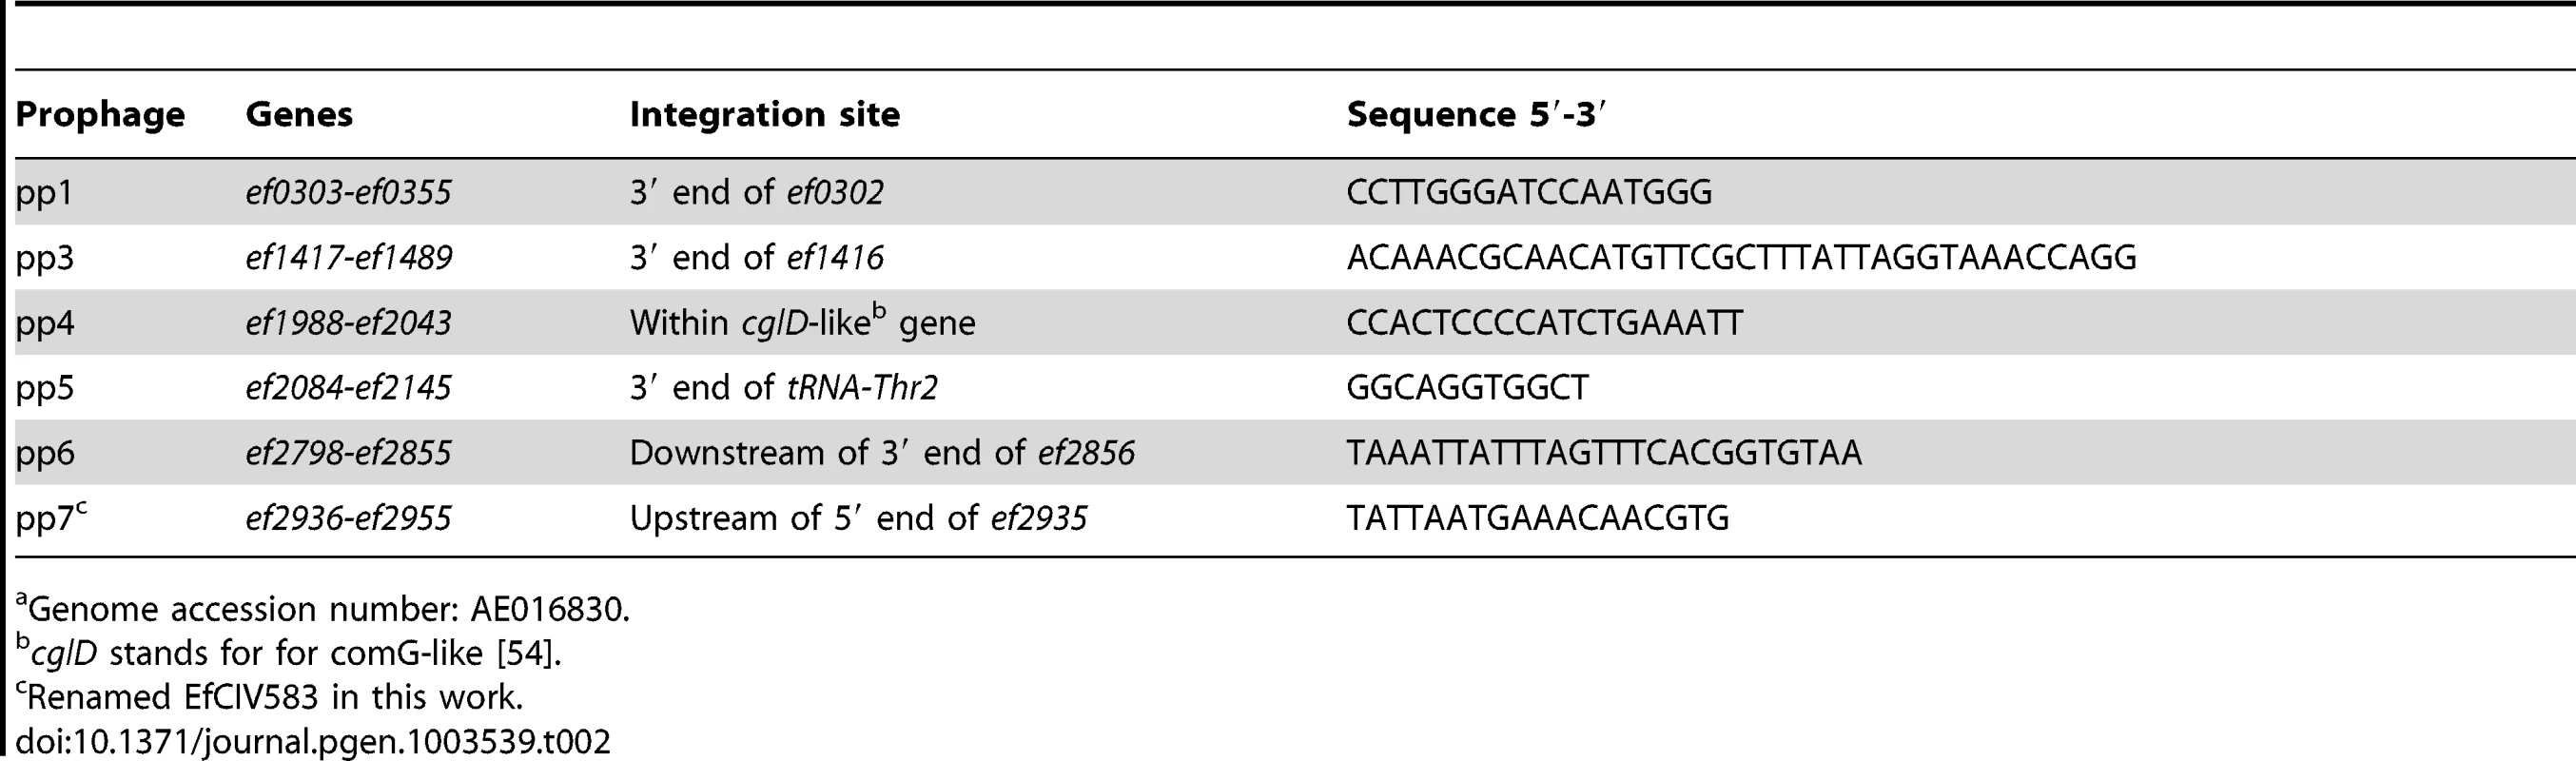 Prophage <i>att</i> core sequence predicted and confirmed experimentally from V583 genome<em class=&quot;ref&quot;>a</em>.